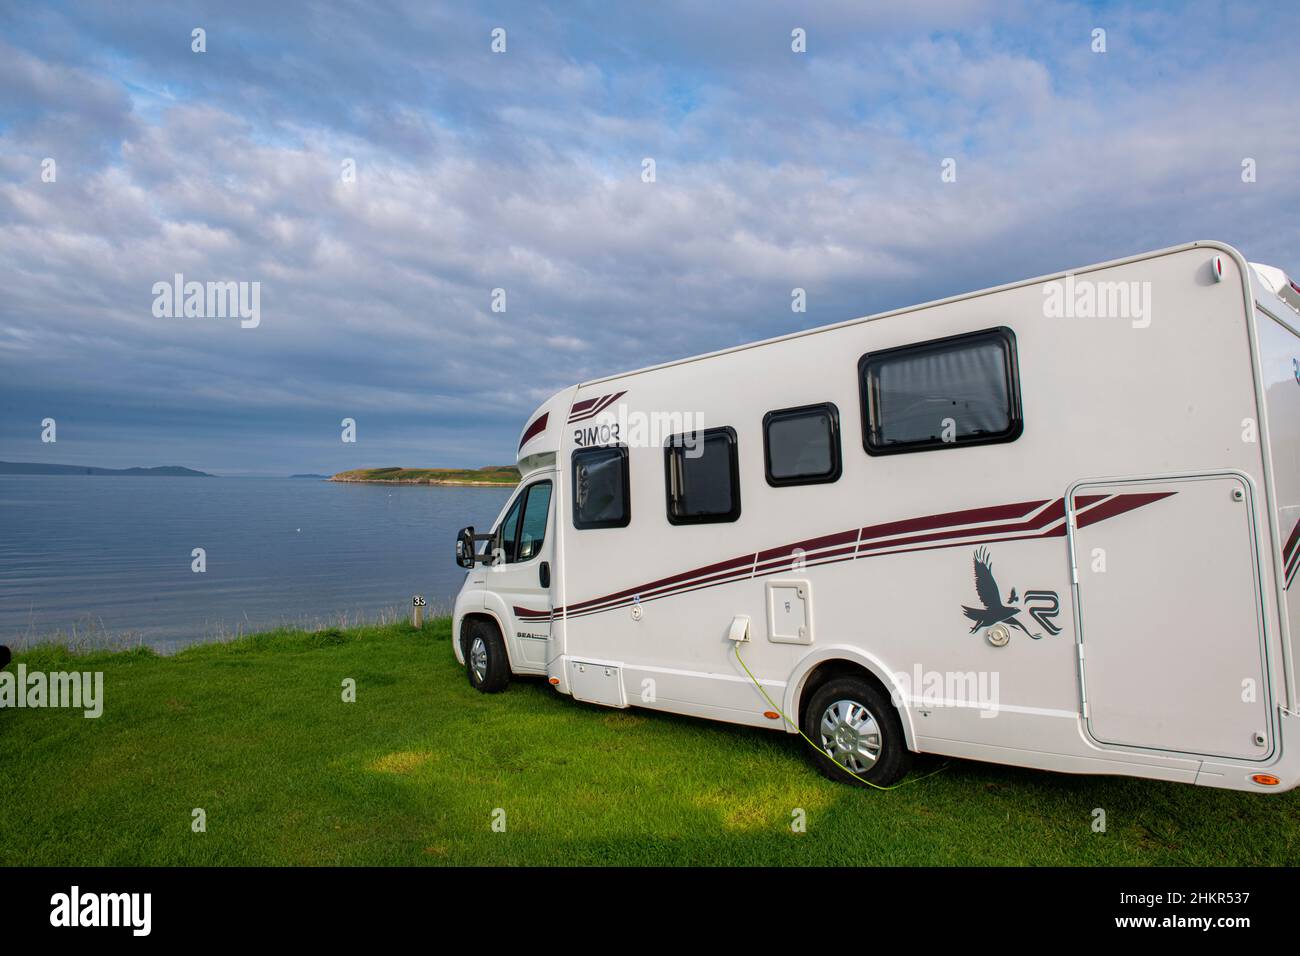 A motothome parked overlooking the Scottish sea Stock Photo